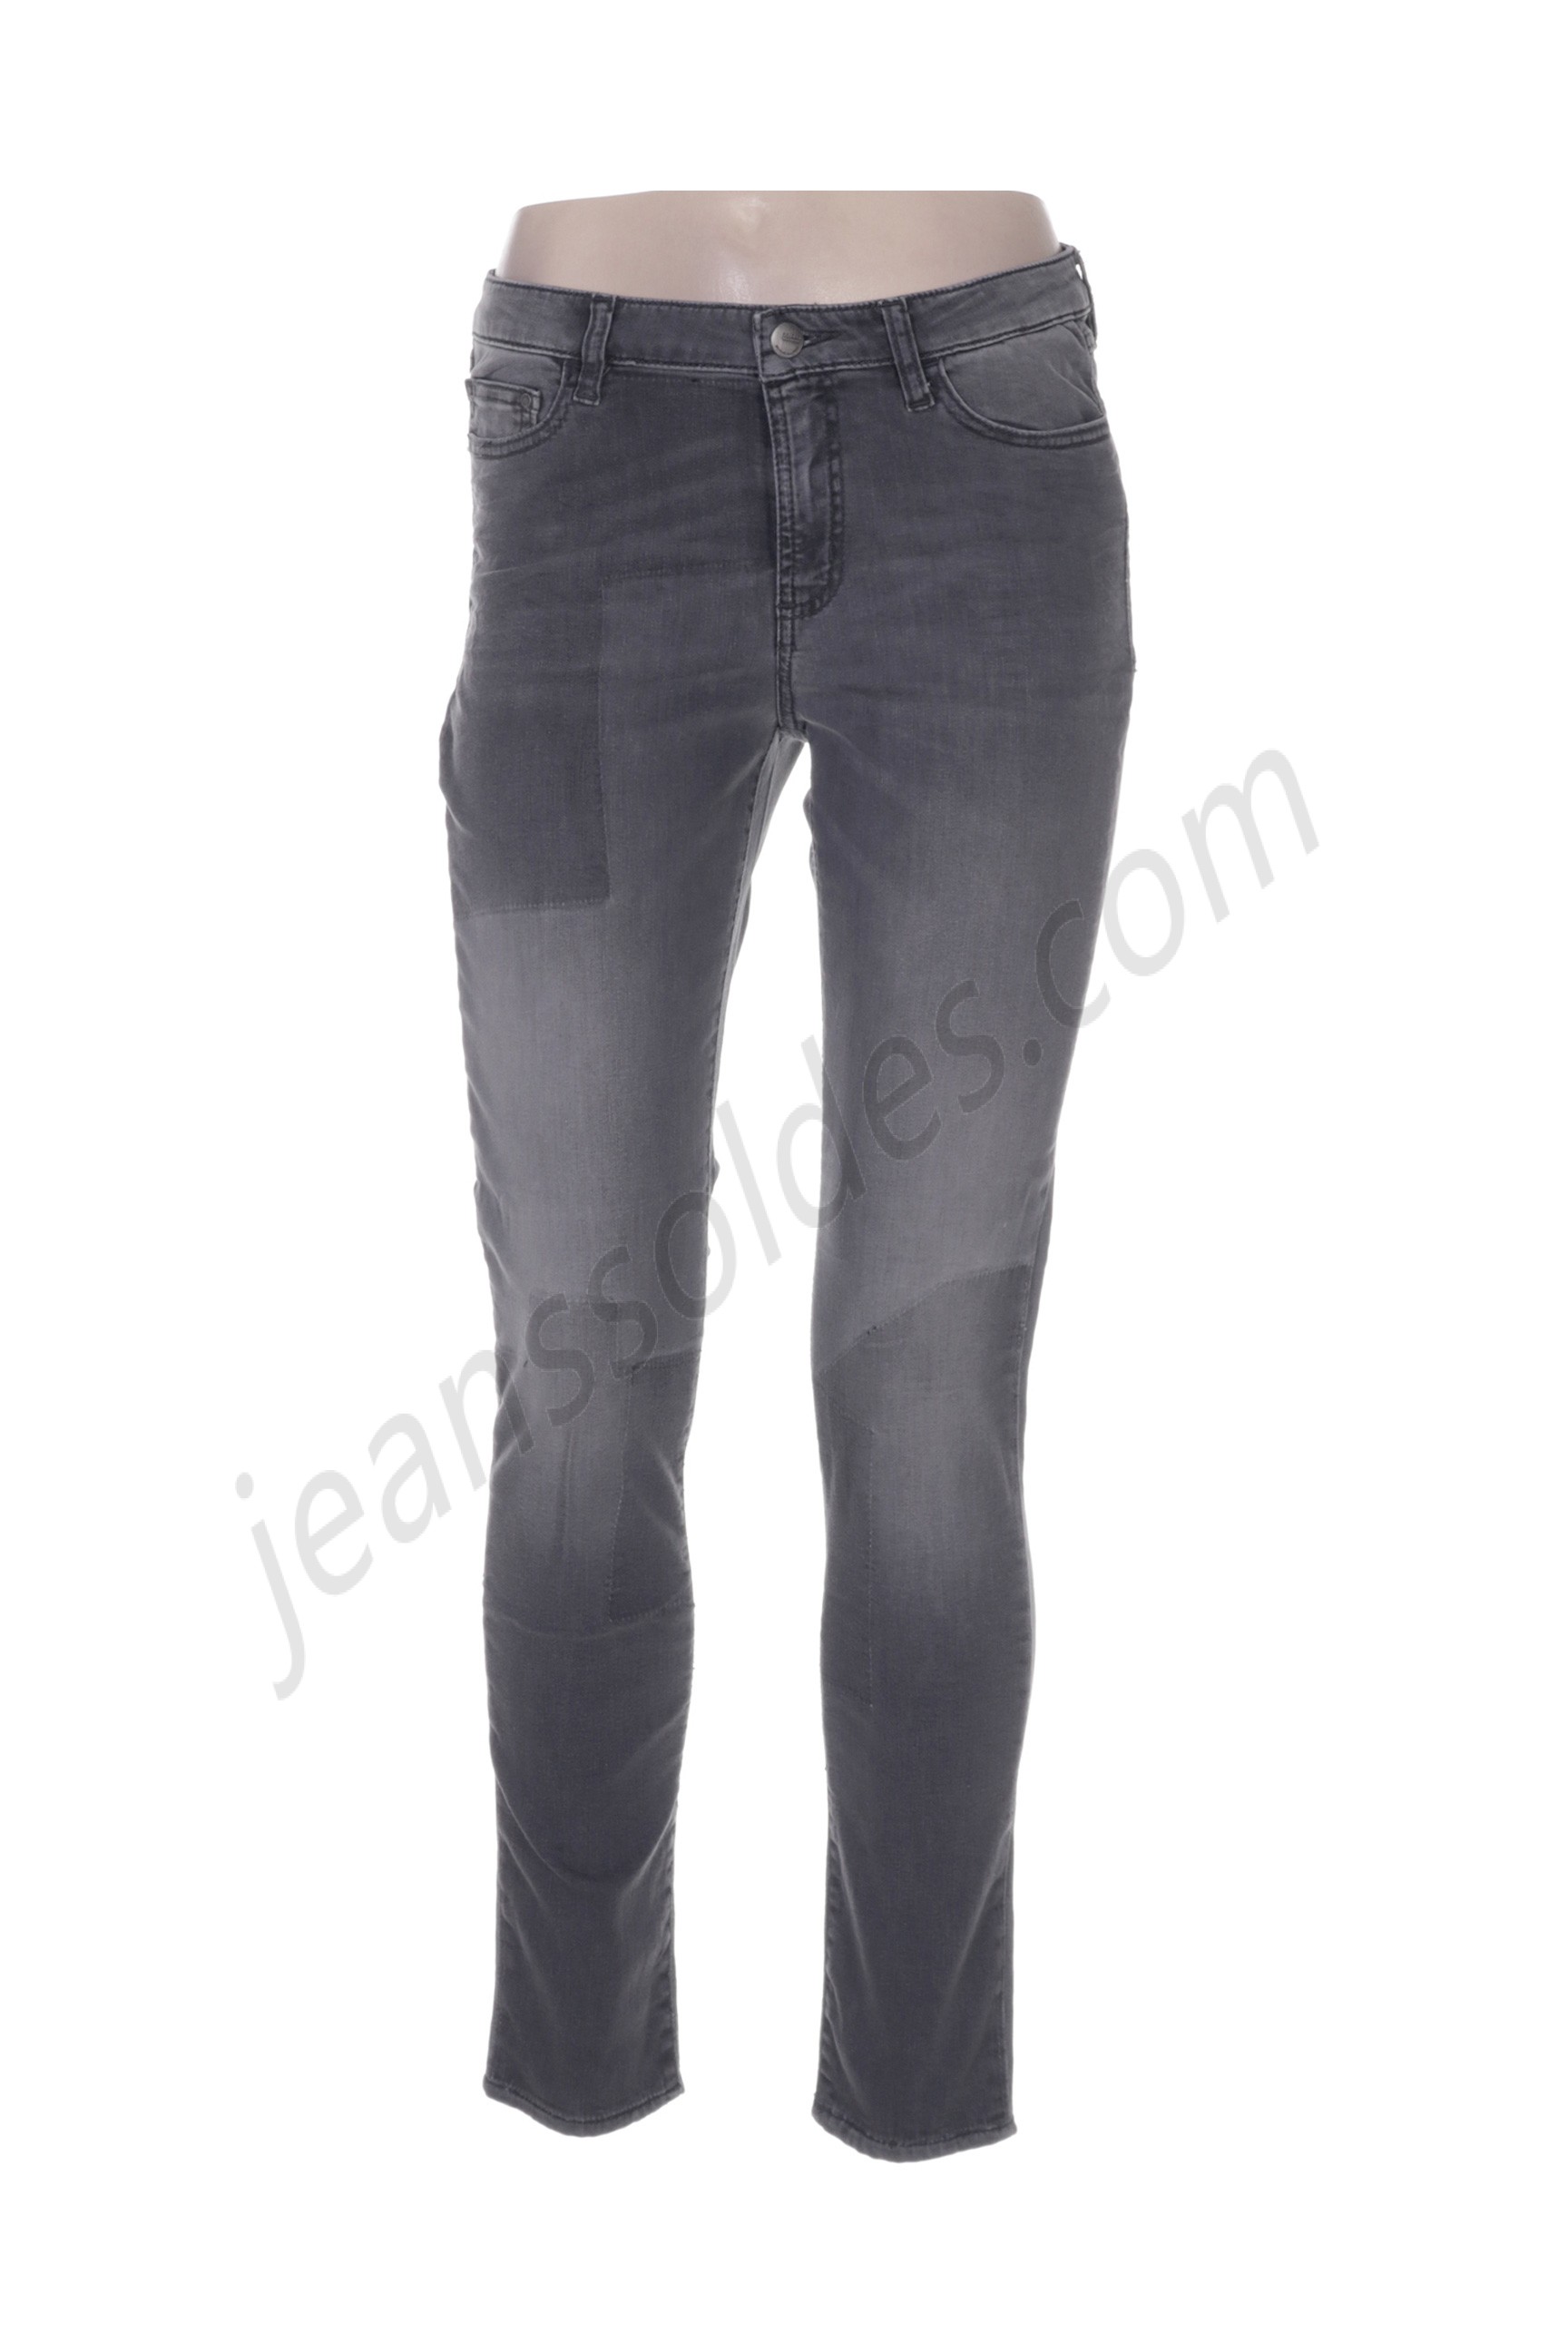 friday-Jeans coupe slim prix d’amis - friday-Jeans coupe slim prix d’amis